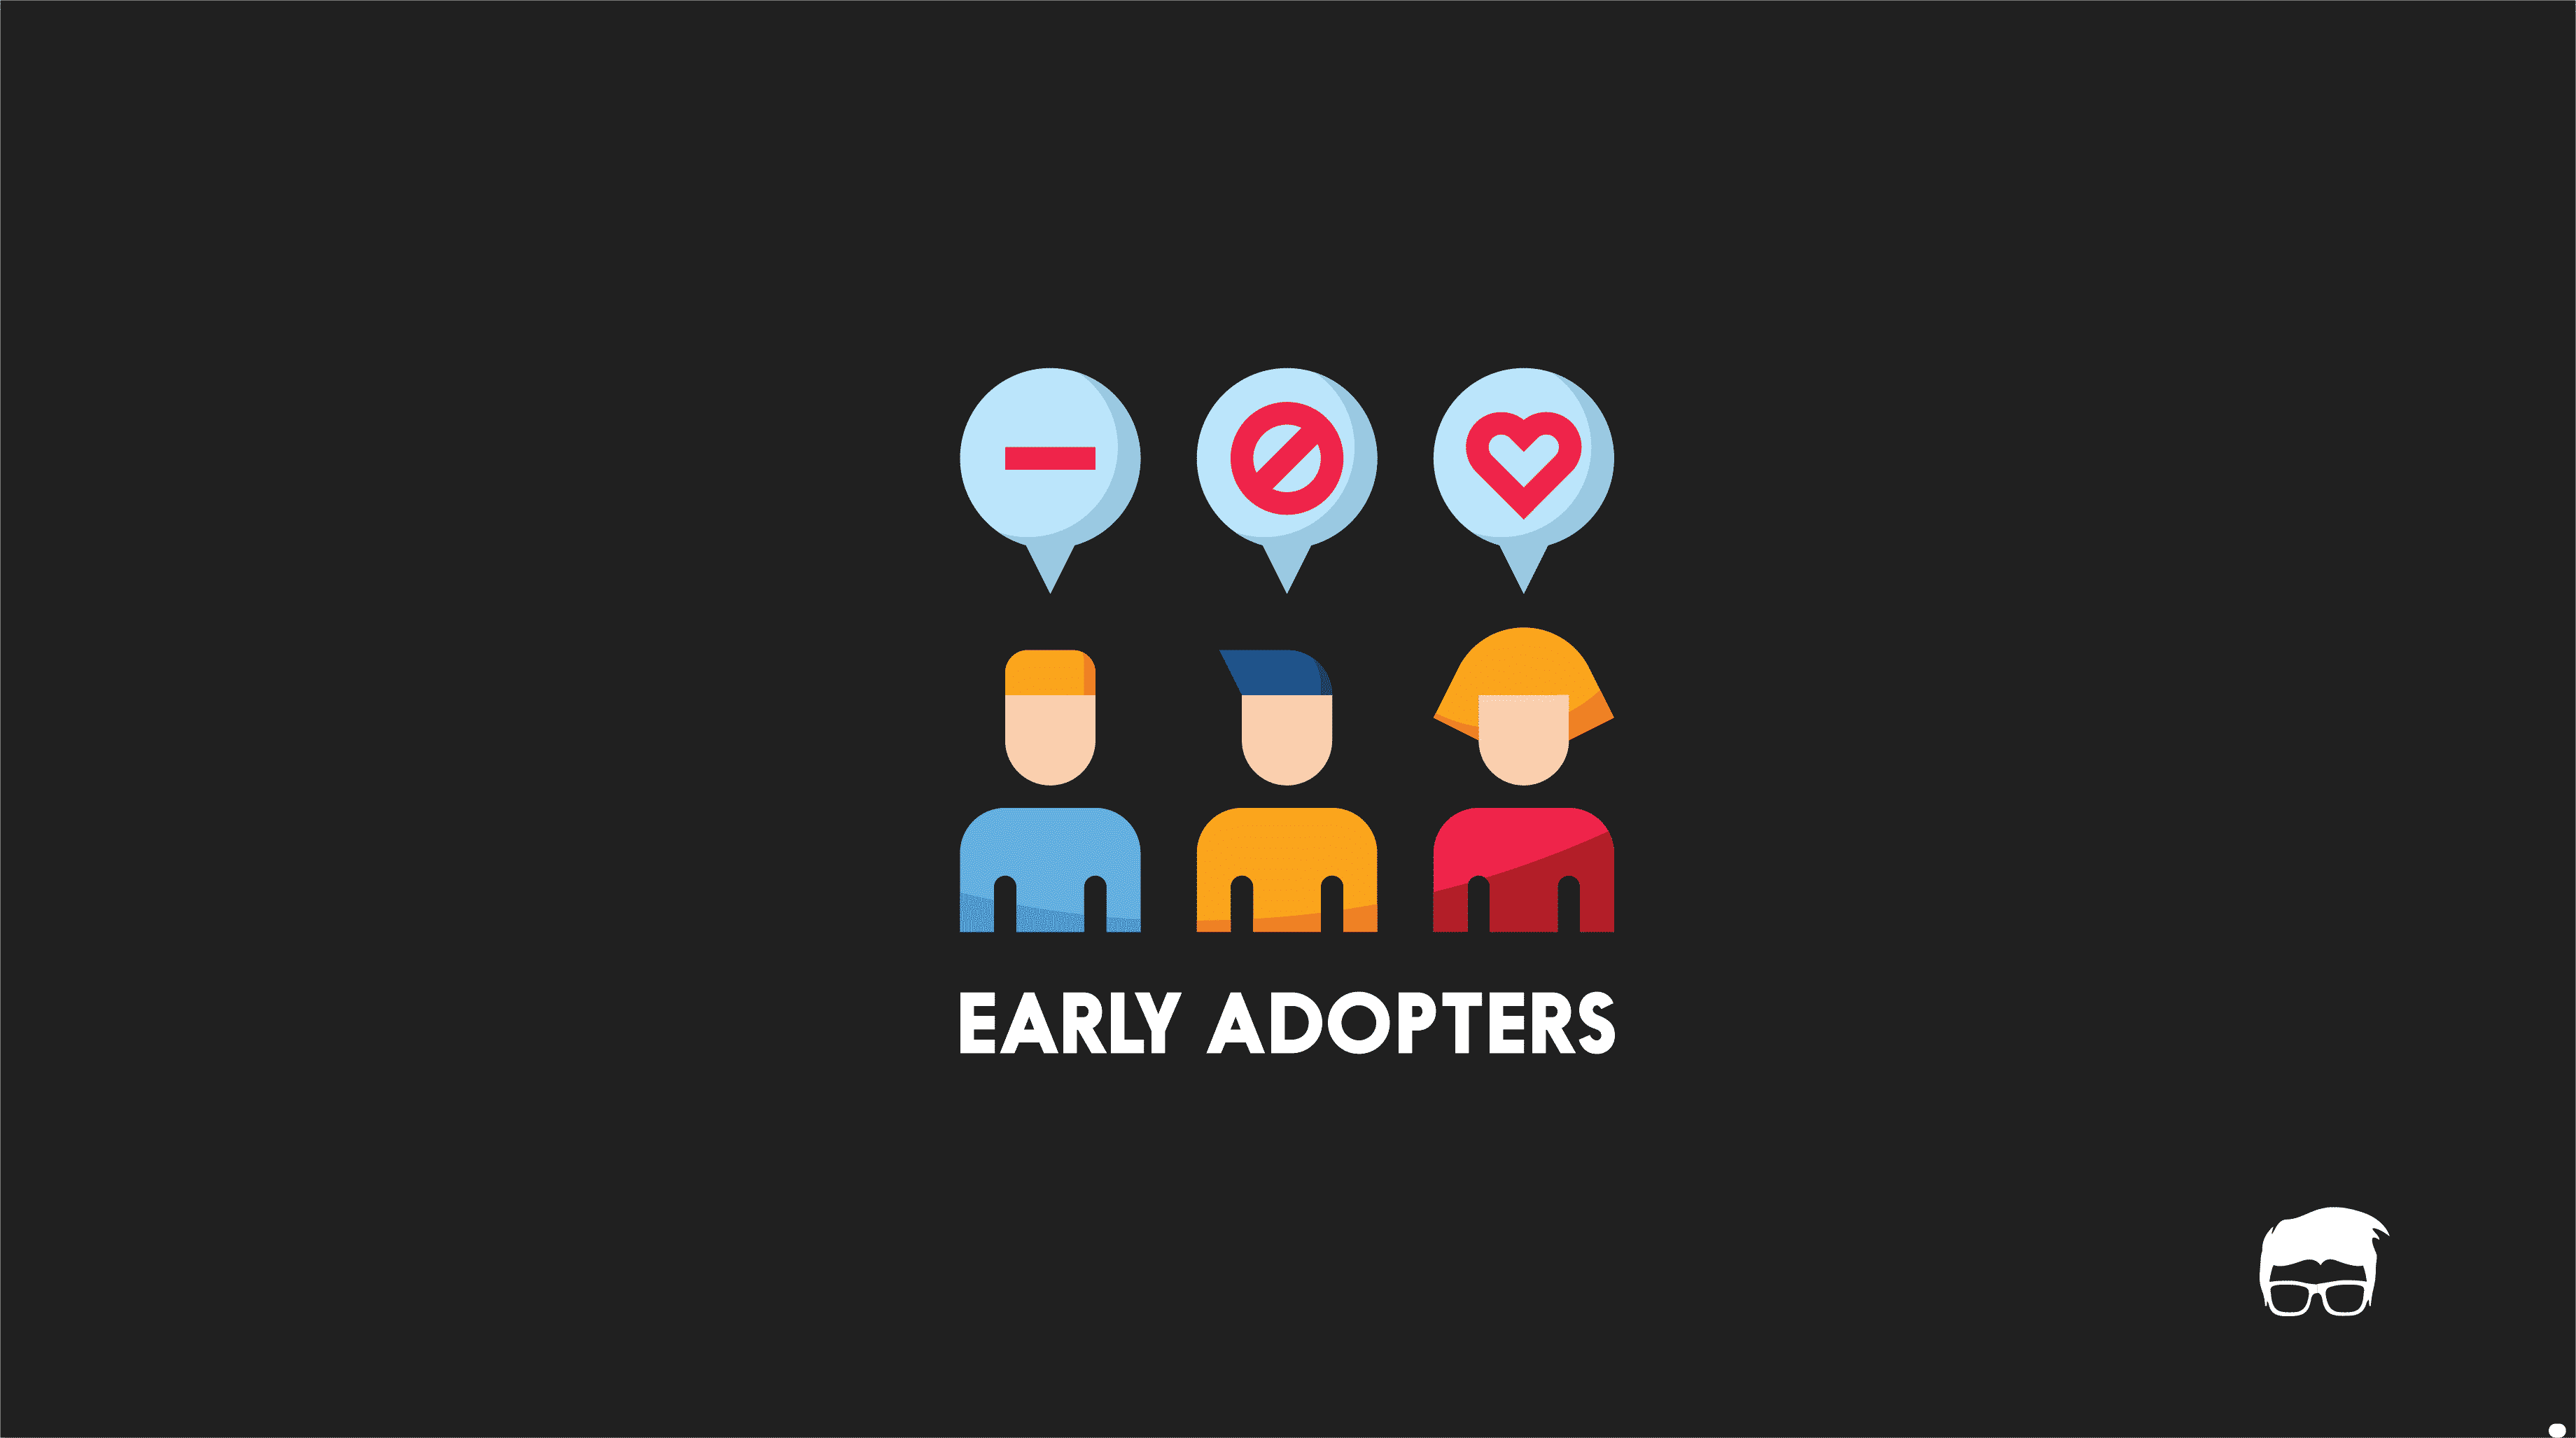 Who Are Early Adopters & Why Do They Matter?